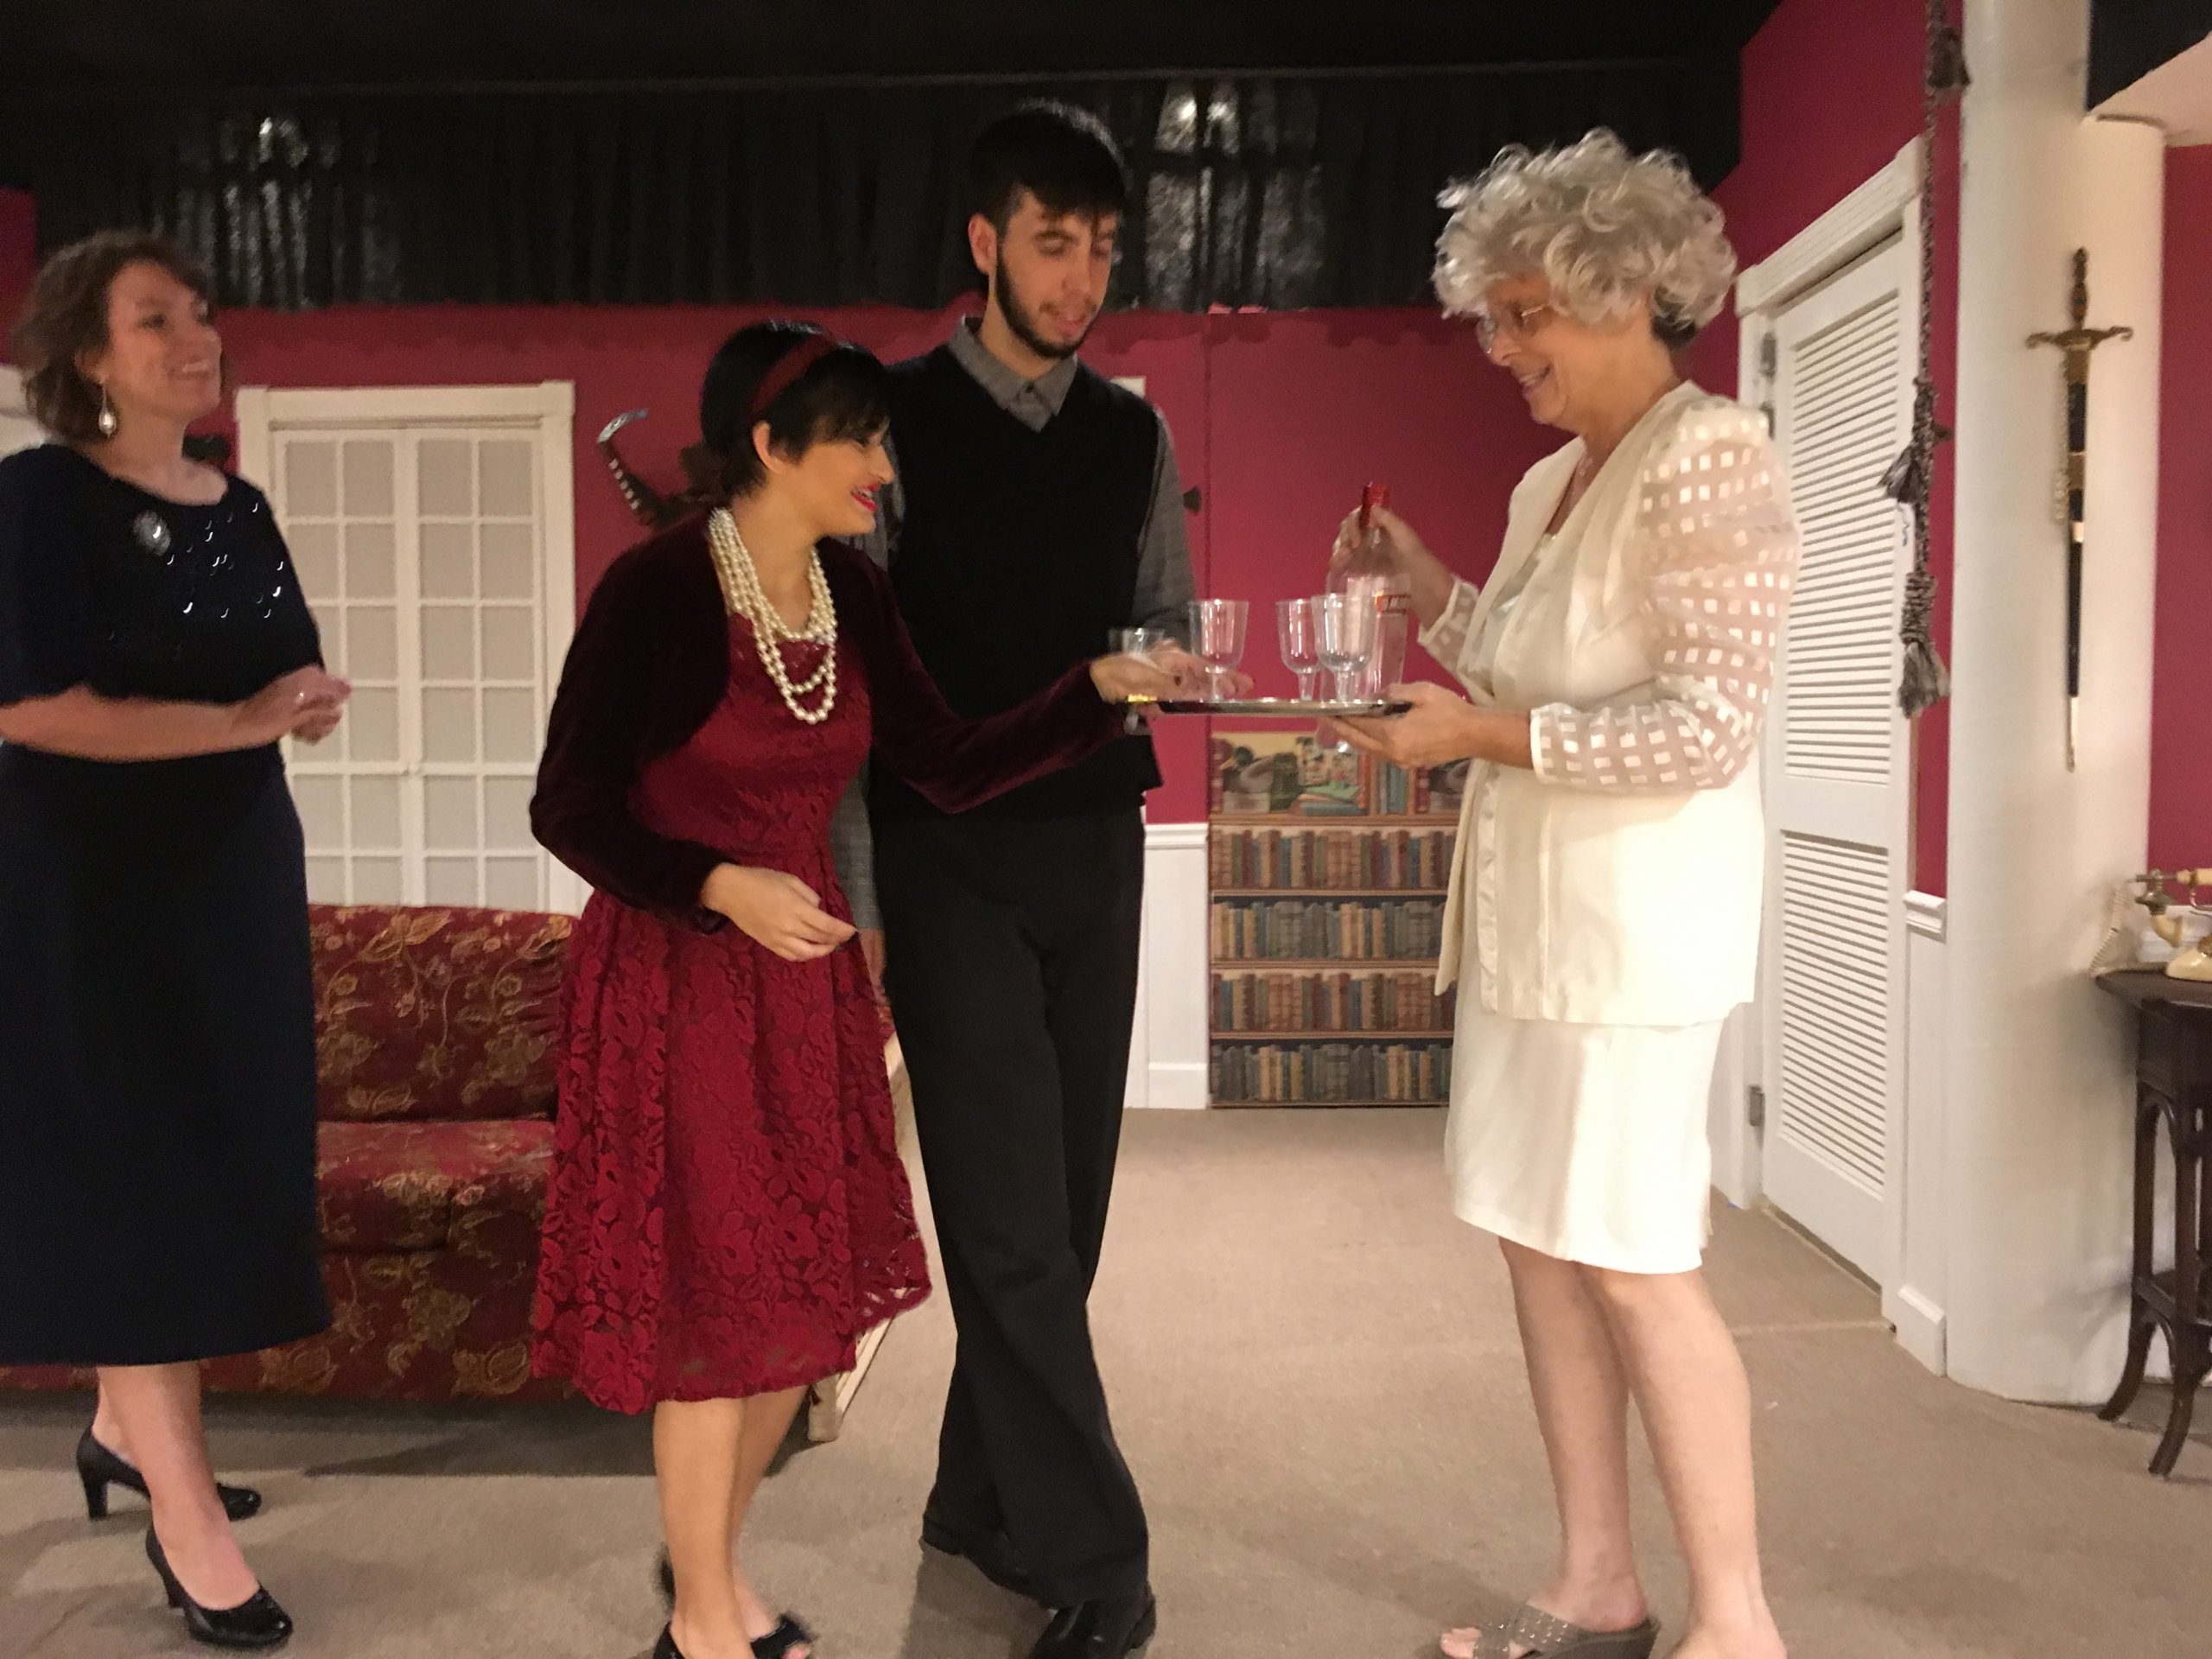 A female actor holds a tray with wine glasses and is offering them to a male actor and two female actors